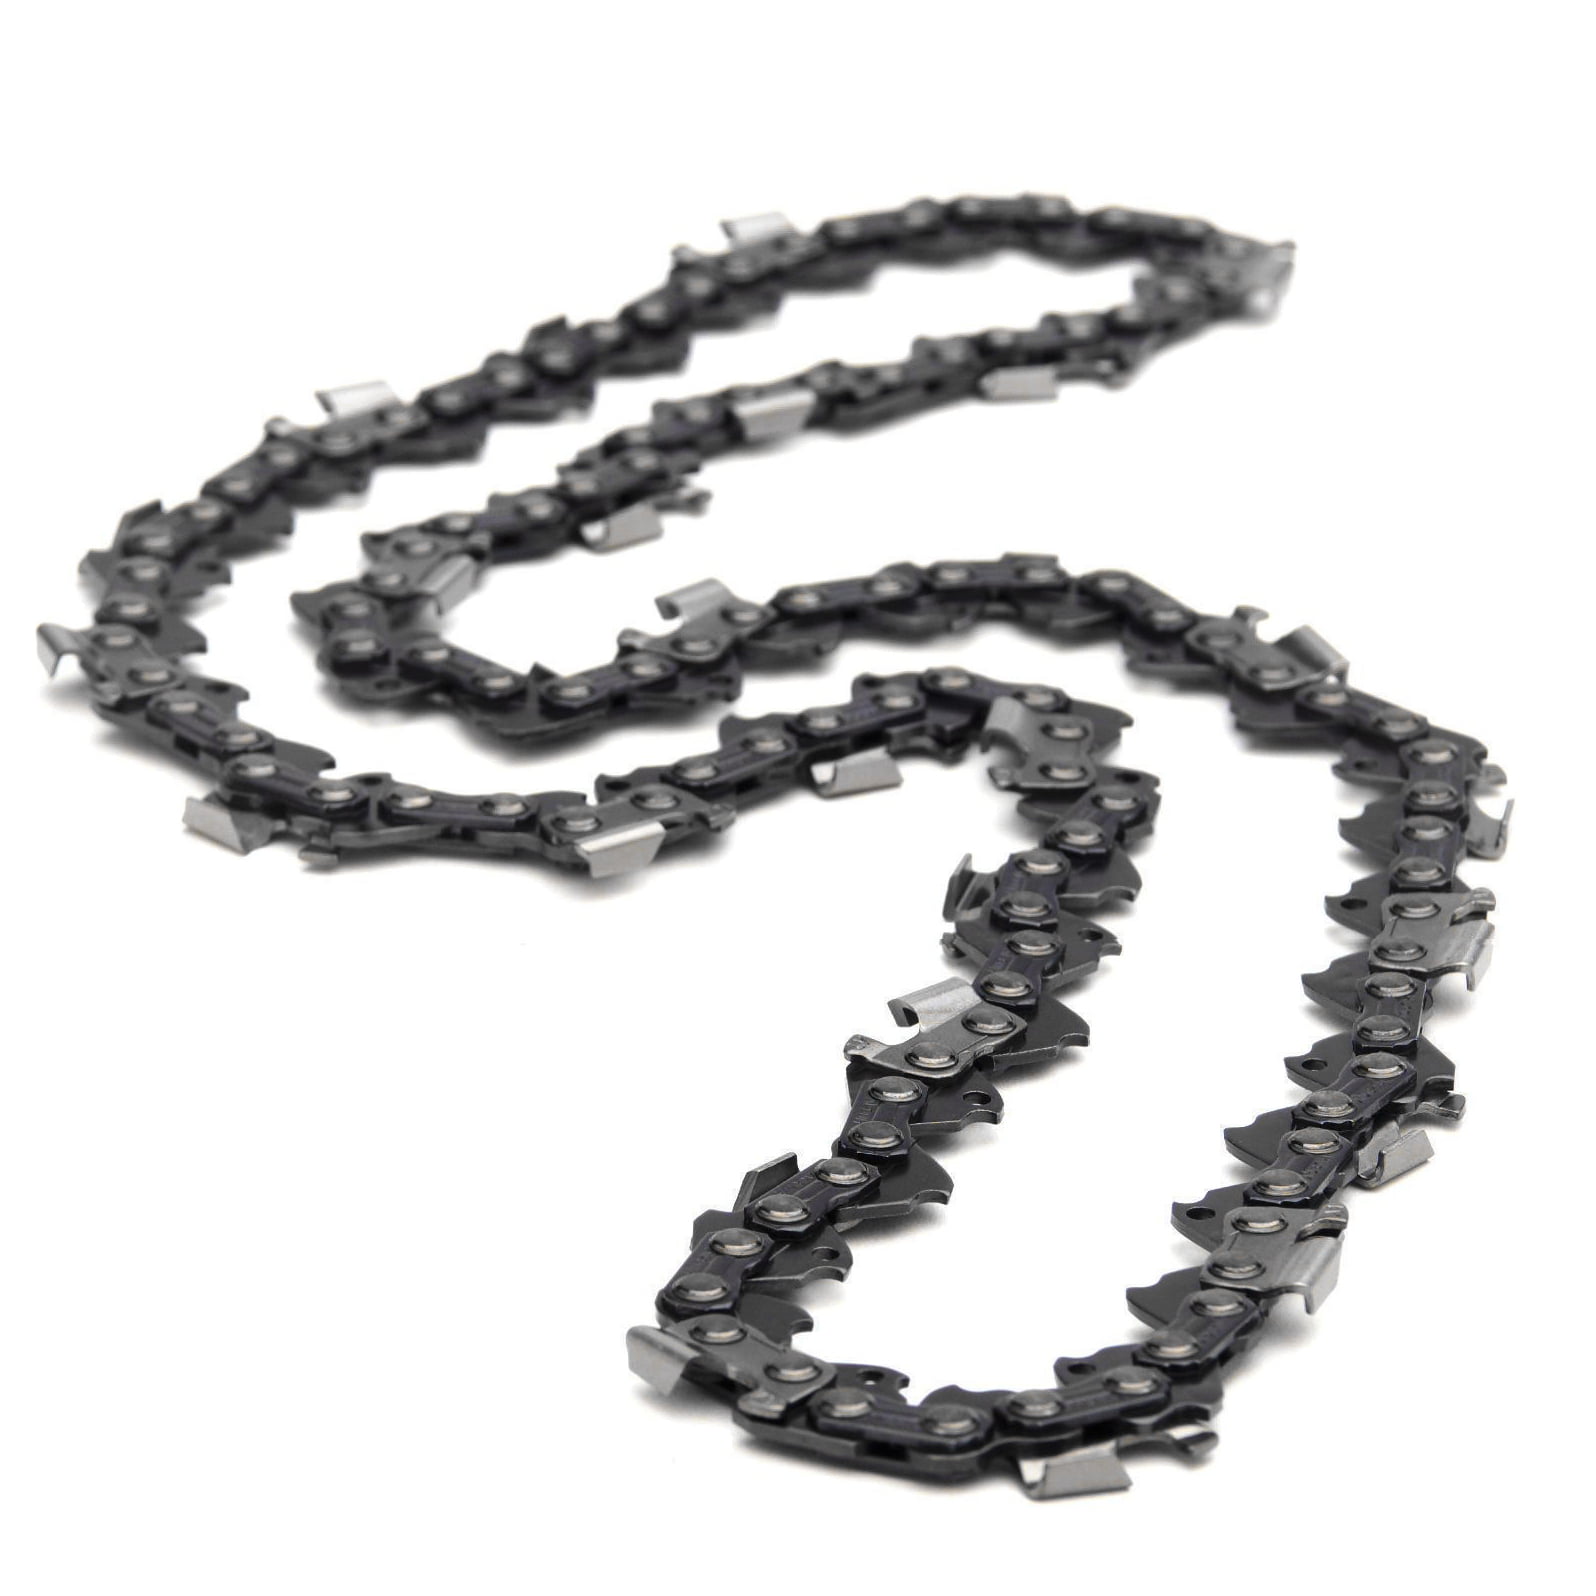 18" Chainsaw Chain .325" 72DL .050" Fit for Husqvarna 36 41 50 55 336 340 345 Nm 